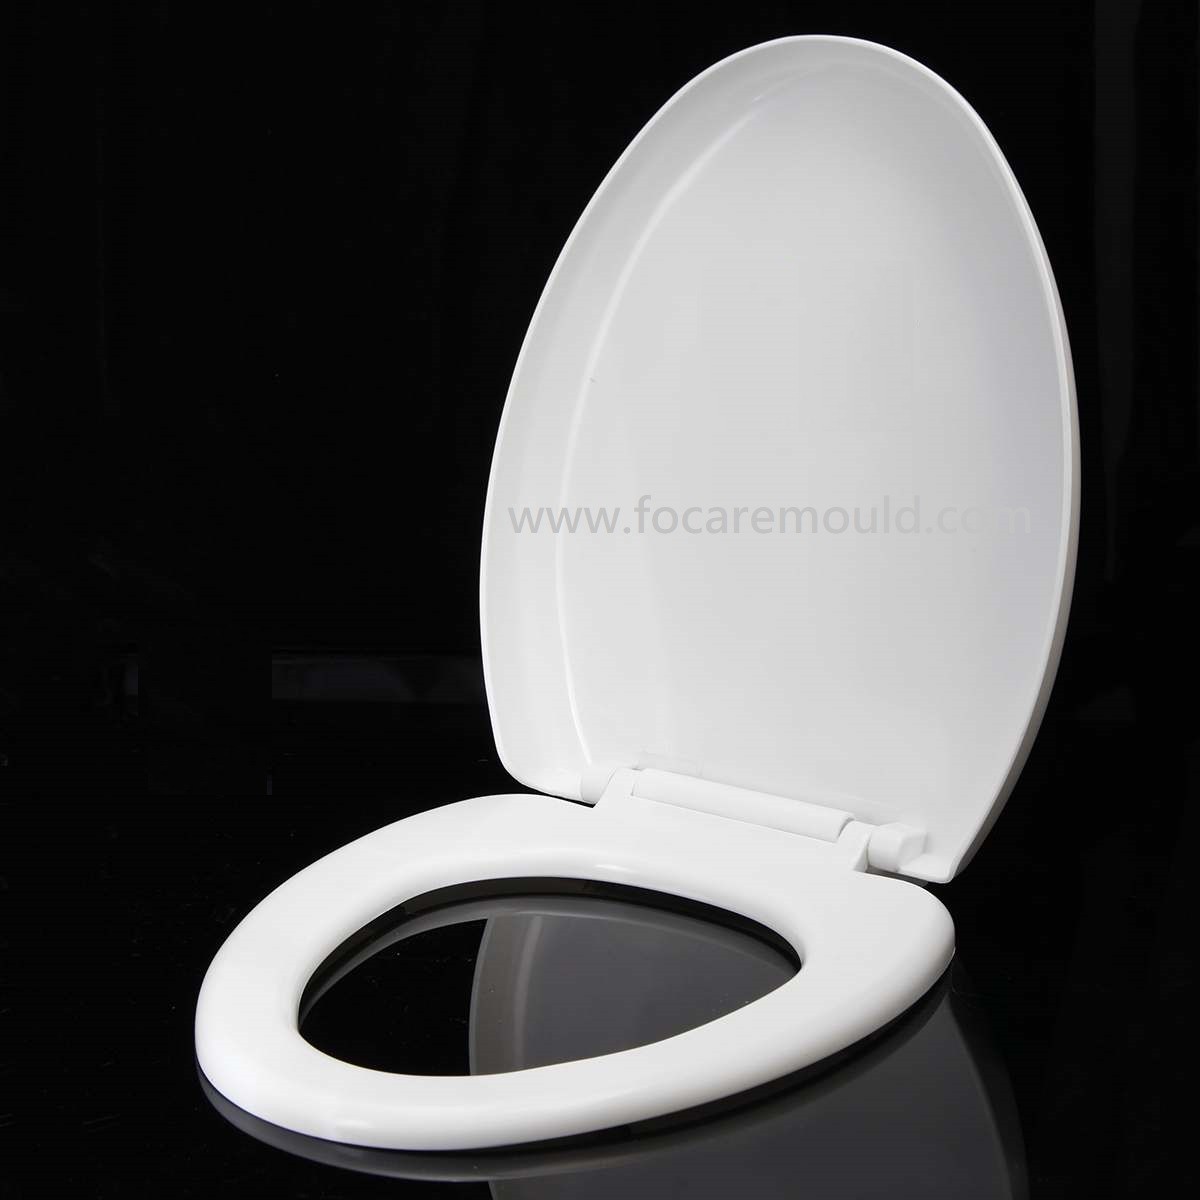 High quality Toilet Seat and Lid Plastic Injection Mould Quotes,China Toilet Seat and Lid Plastic Injection Mould Factory,Toilet Seat and Lid Plastic Injection Mould Purchasing